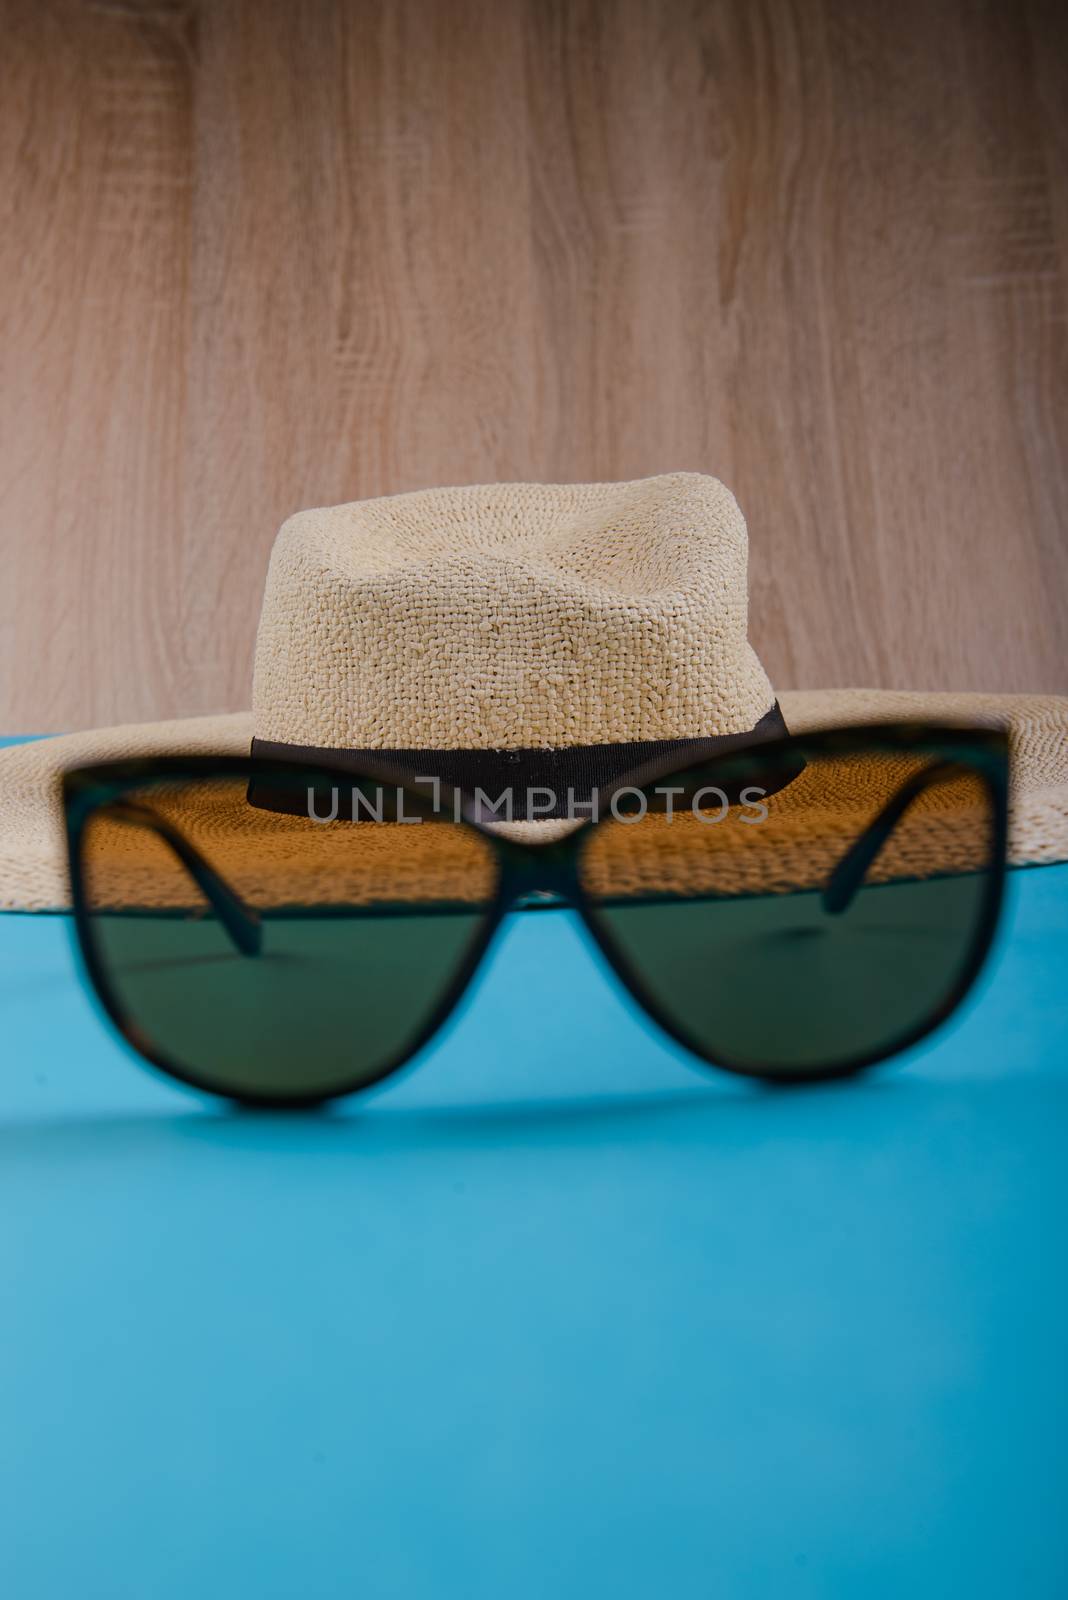 Straw hat and sunglasses by Brejeq